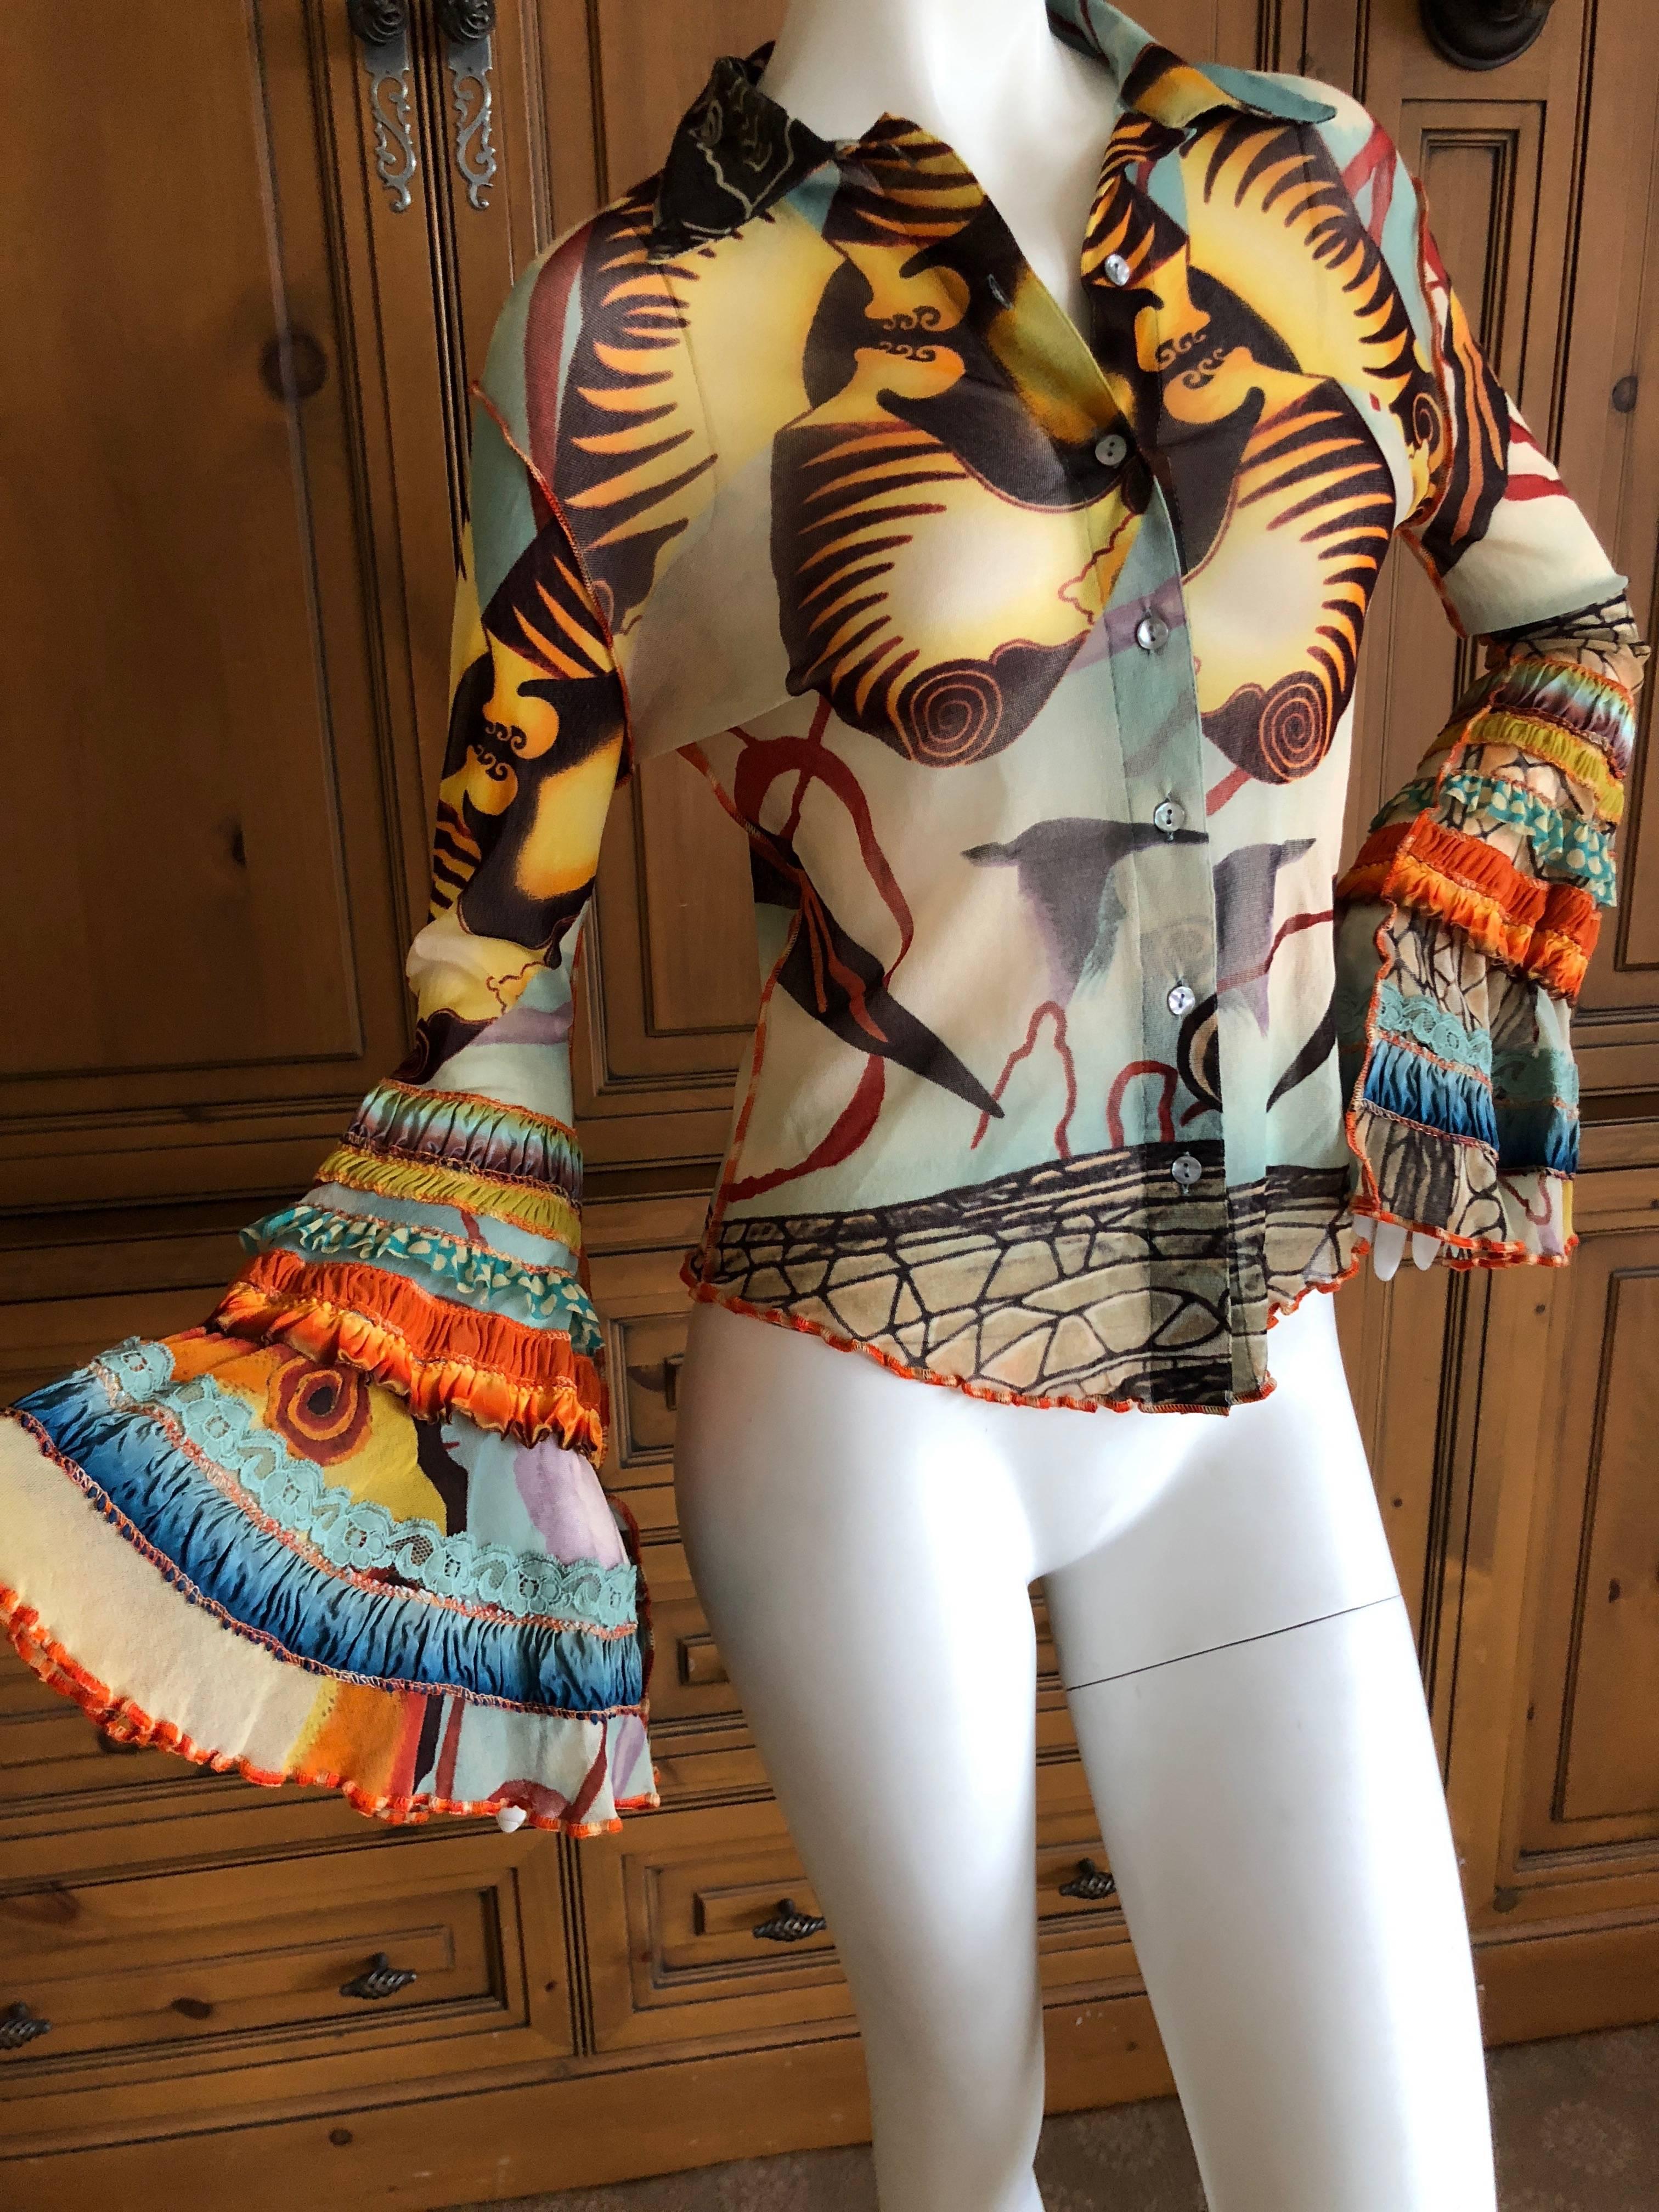 Jean Paul Gaultier Maille Festive Bell Sleeve Gypsy Top 
New with Tags  
Size M
Bust 36